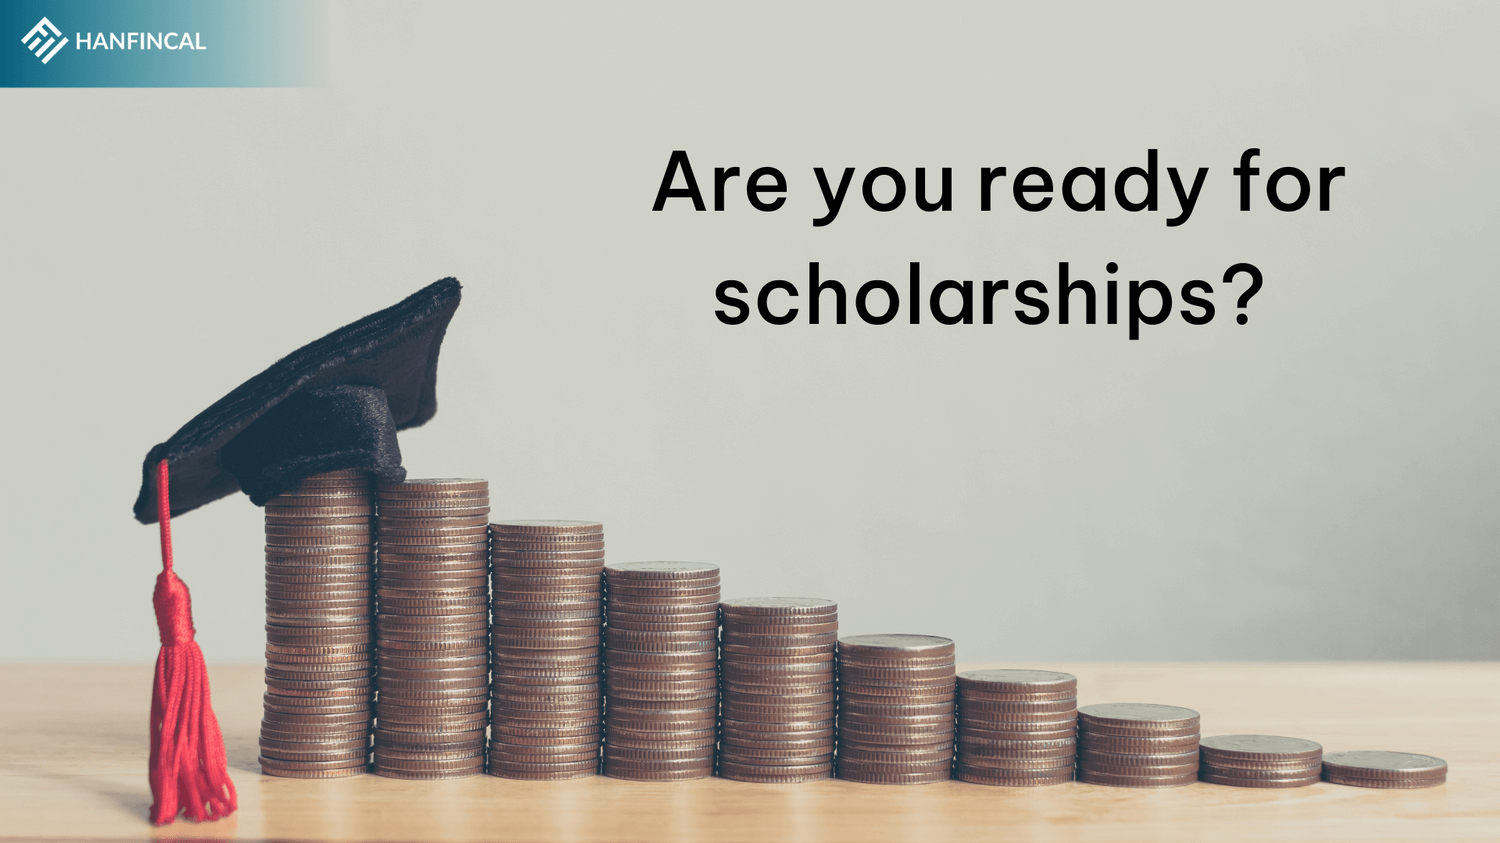 Are you ready for scholarships?